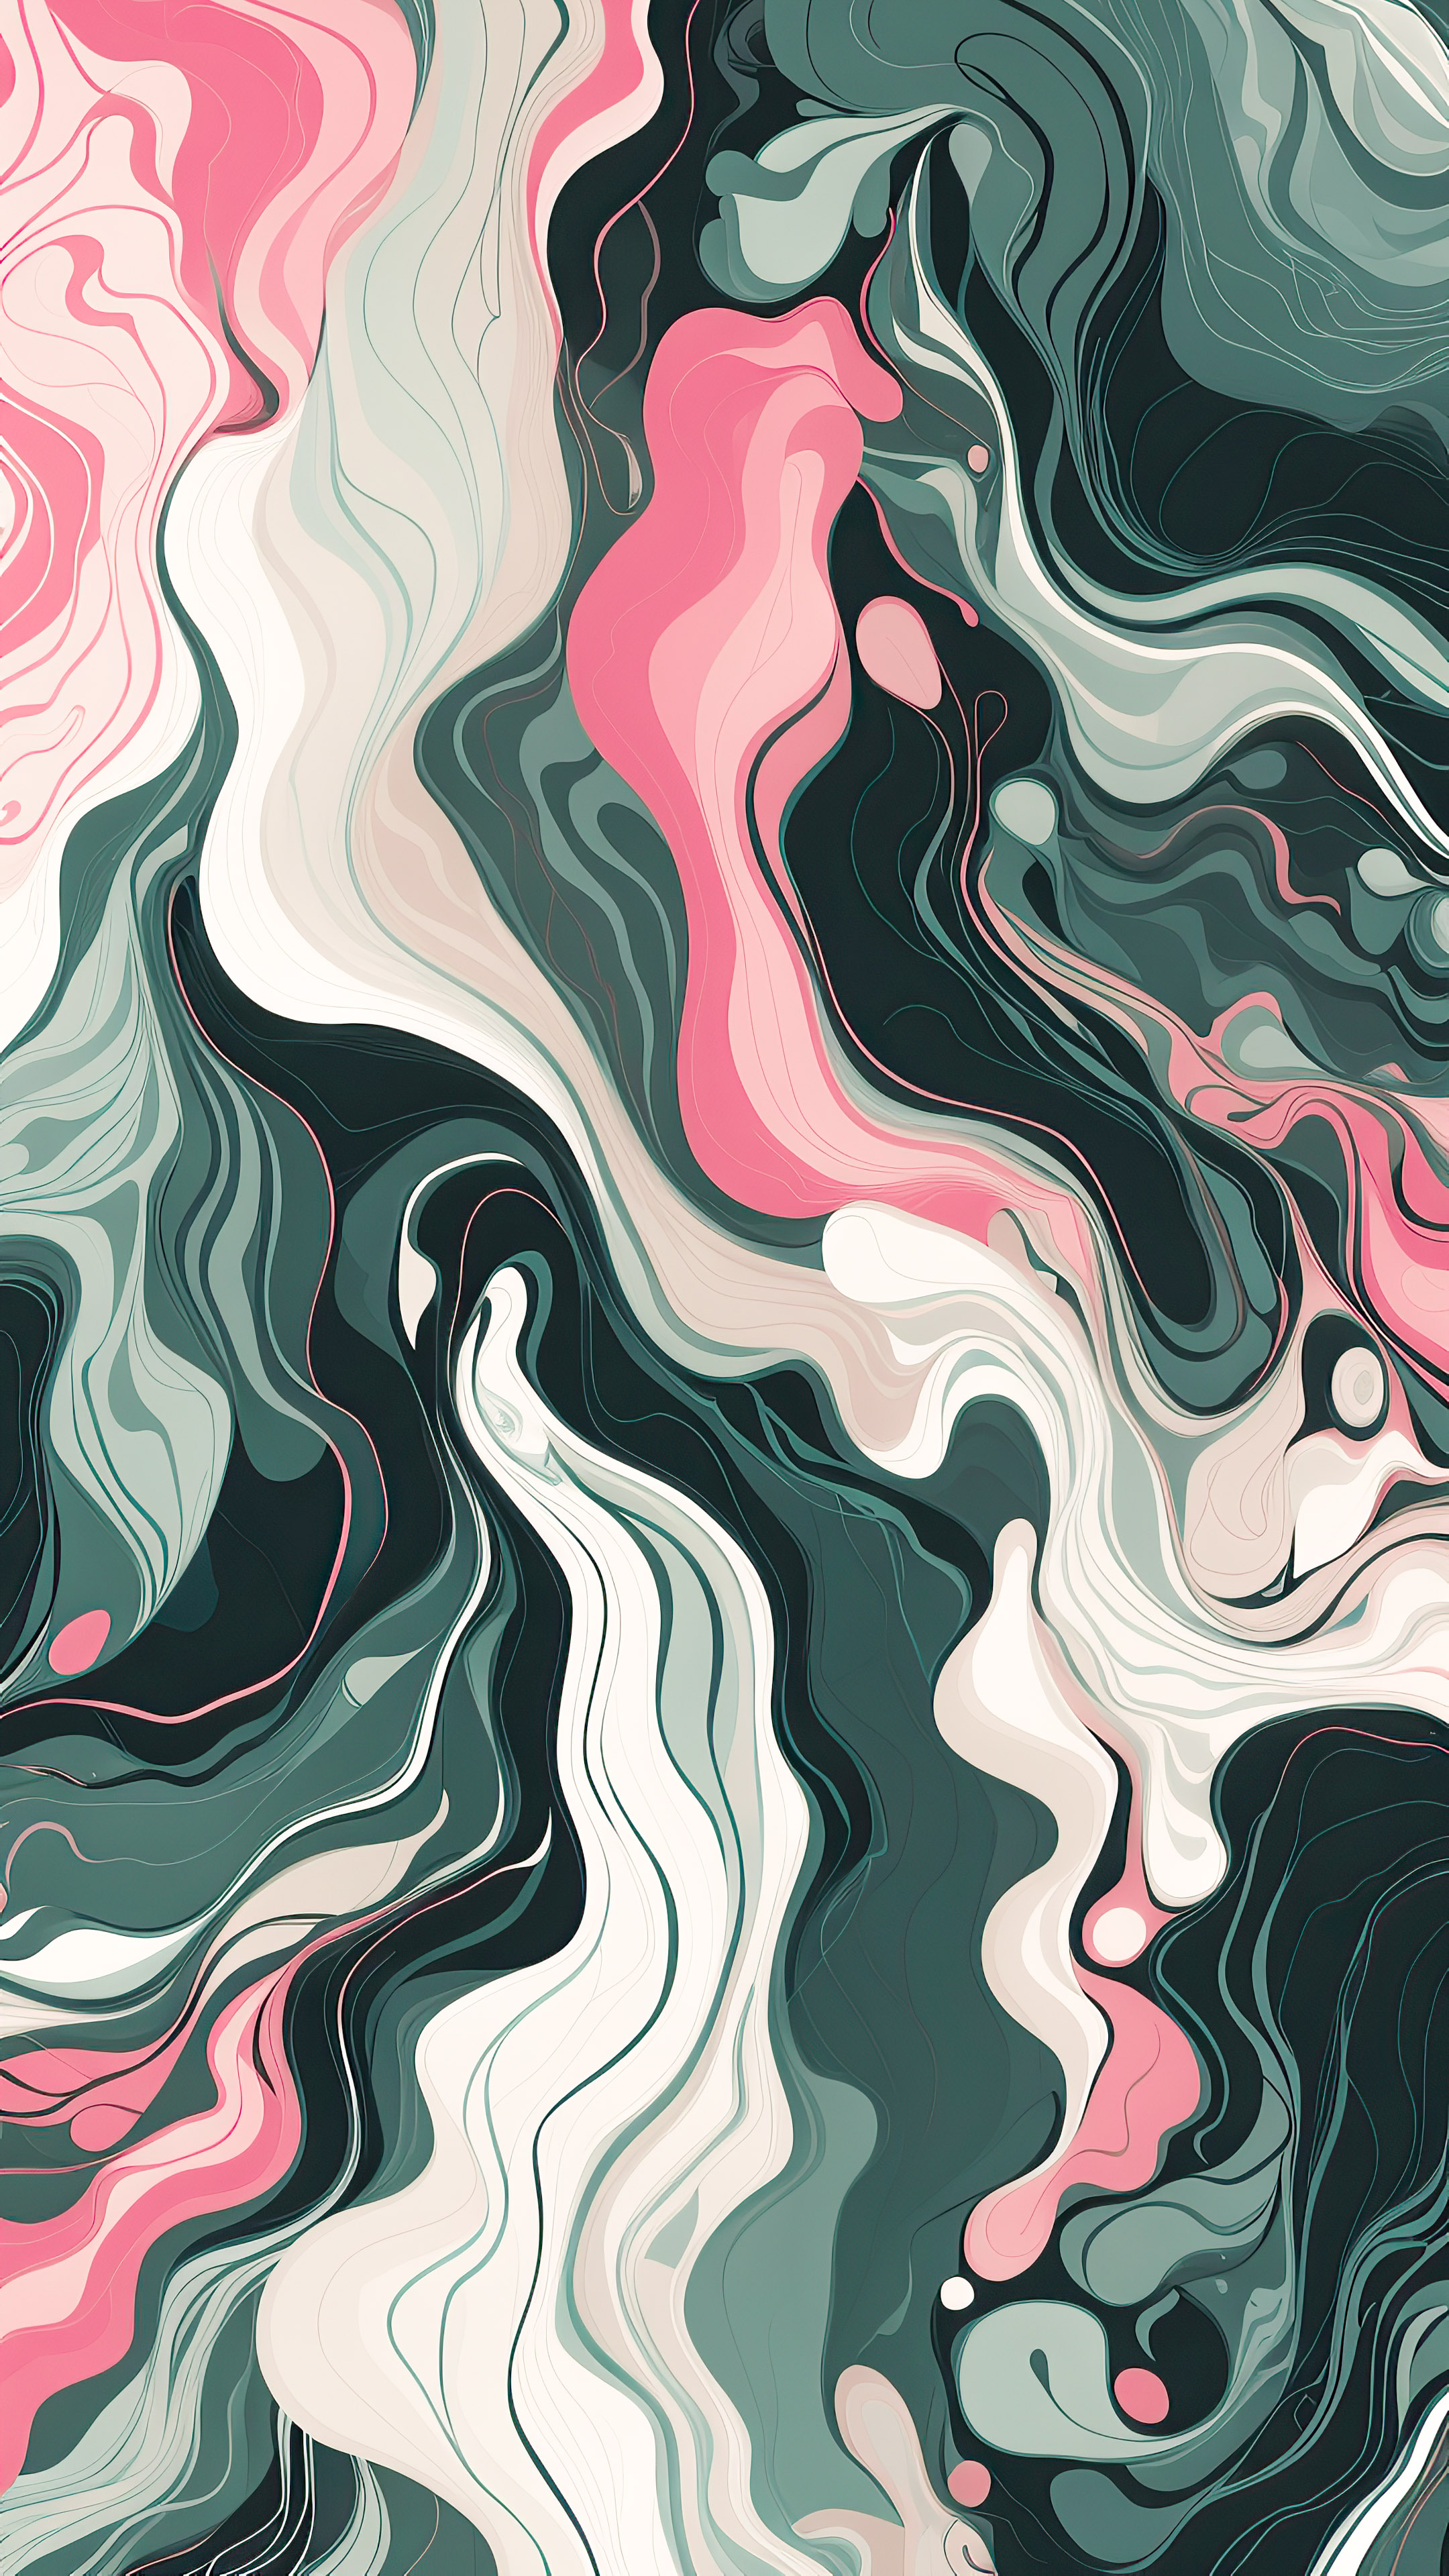 Transform your mobile with abstract wallpaper 4k inspired by nature, showcasing flowing lines and organic shapes.